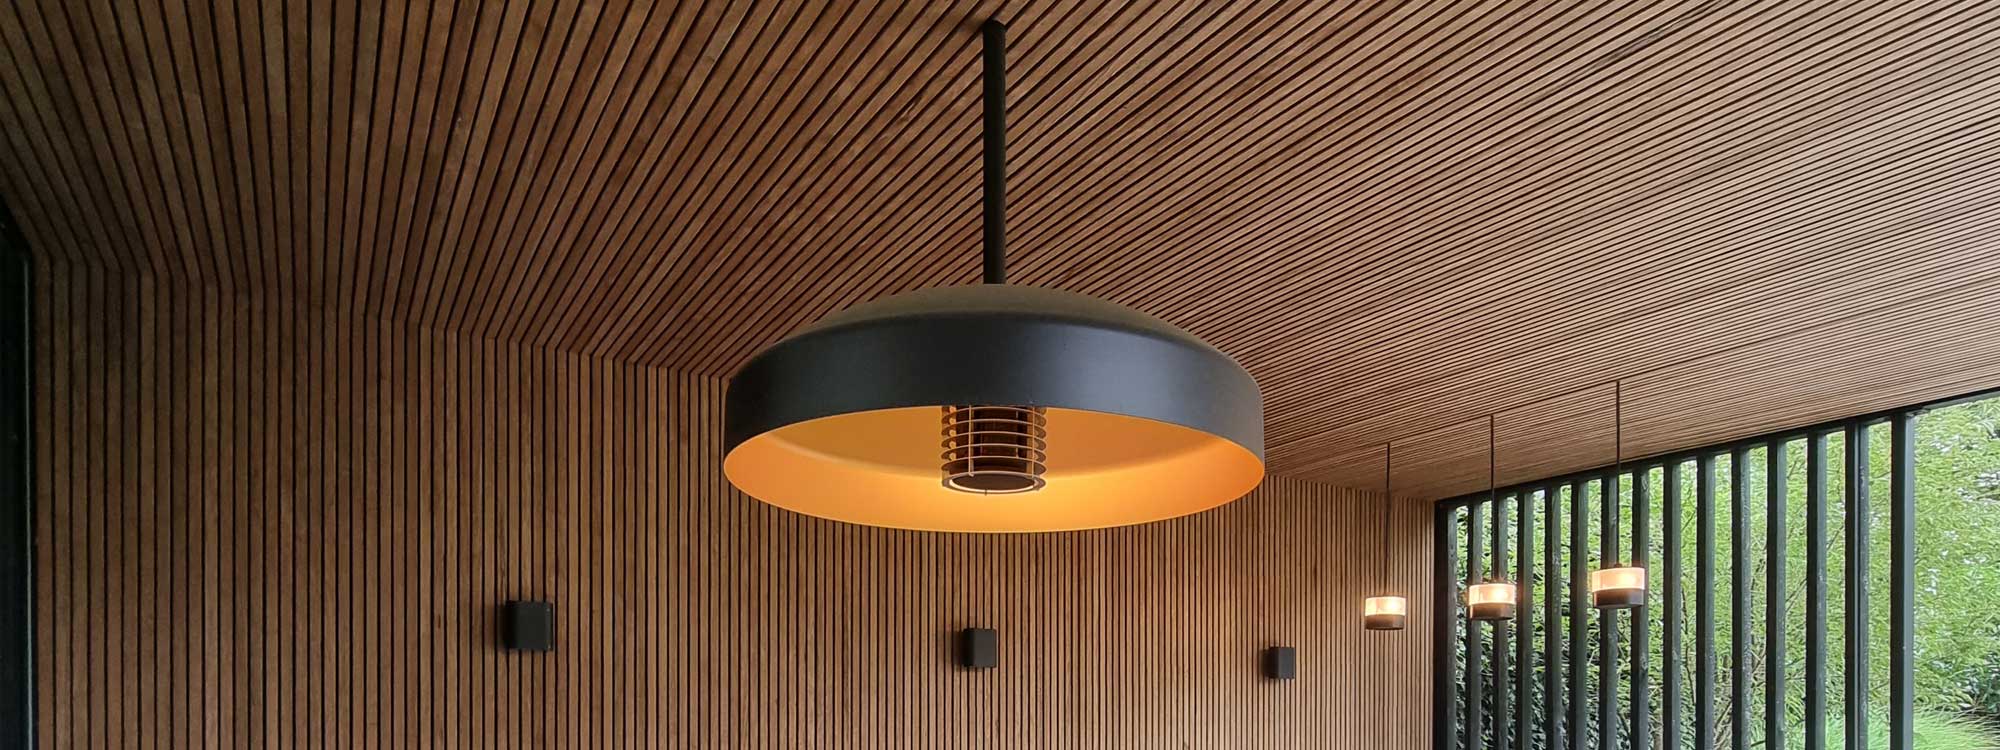 Image of Heatsail Disc Pendant exterior ceiling heater above chic outdoor sofa in wooden-clad garden room